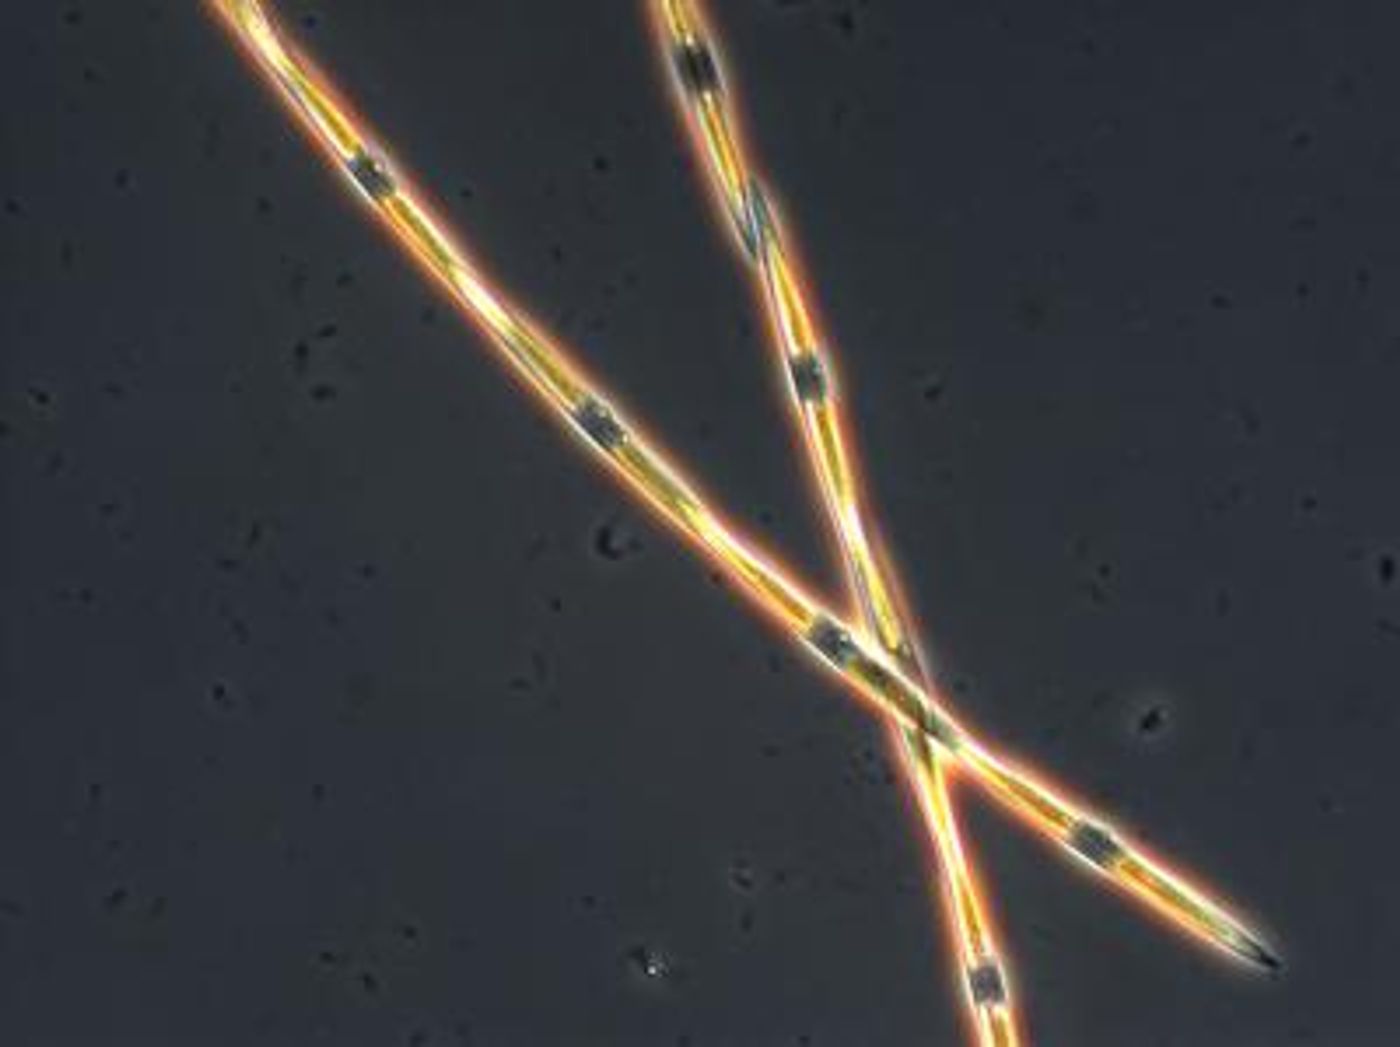 This is a microscopic view of domoic acid producing Pseudo-nitzschia diatom in a seawater sample from Monterey Bay, Calif. This diatom species, when in active growth typically typically forms long chains of individual cells. / Credit: G. Jason Smith at Moss Landing Marine Labs.